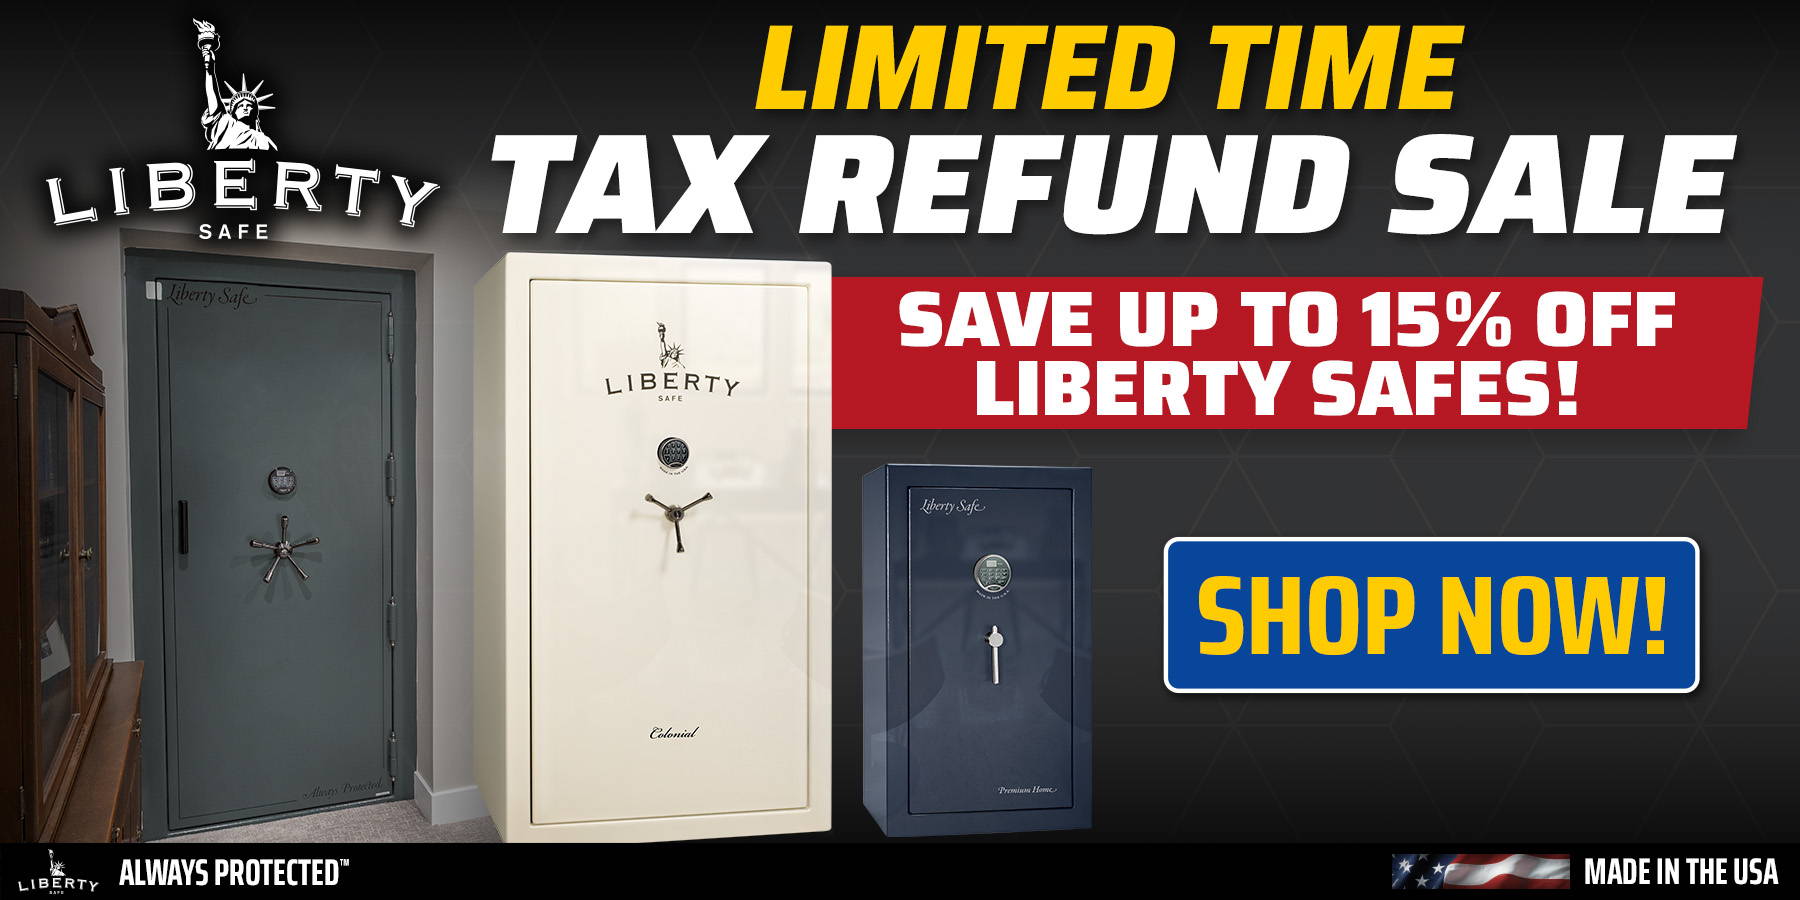 Liberty Safe Tax Refund Sale - Save up to 15% Off Selected Safes